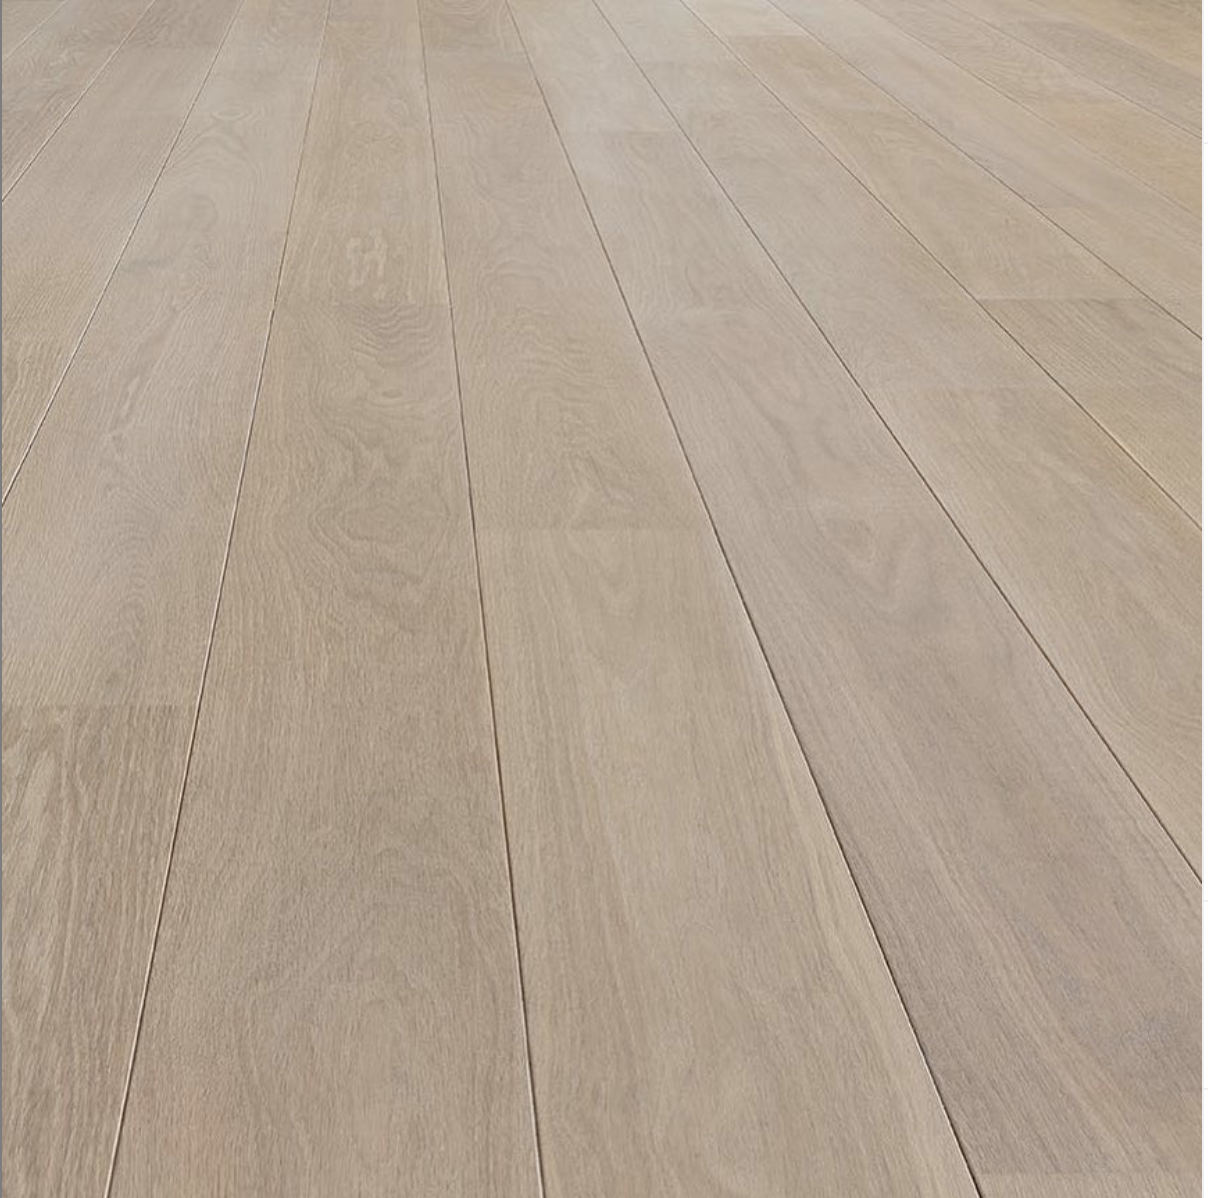 Wide Plank Flooring, Is Wide Plank Flooring More Expensive